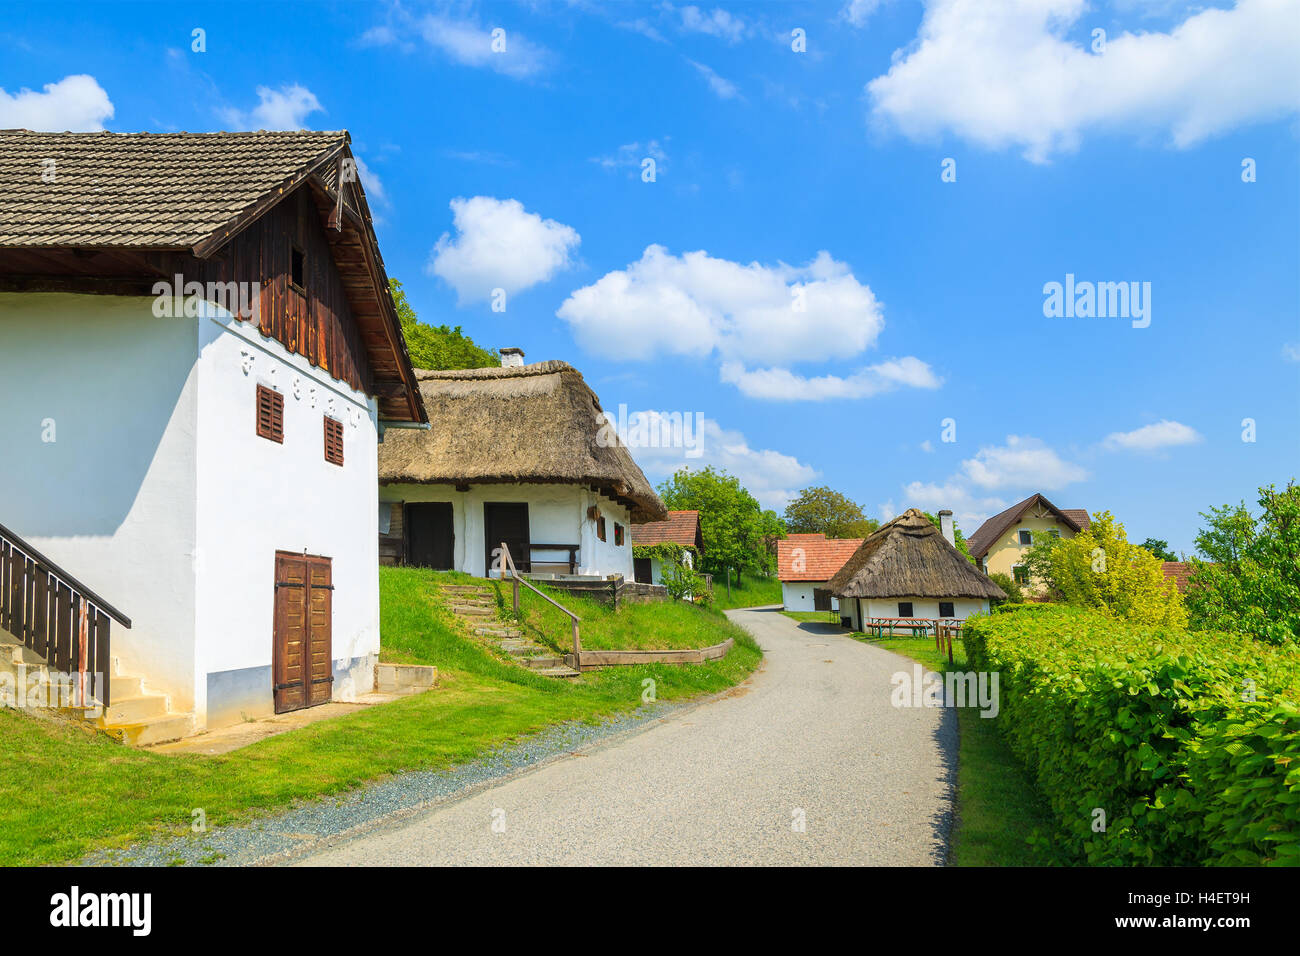 Idyllic road in a village with traditional cottage houses, wine making region Burgenland, Austria Stock Photo